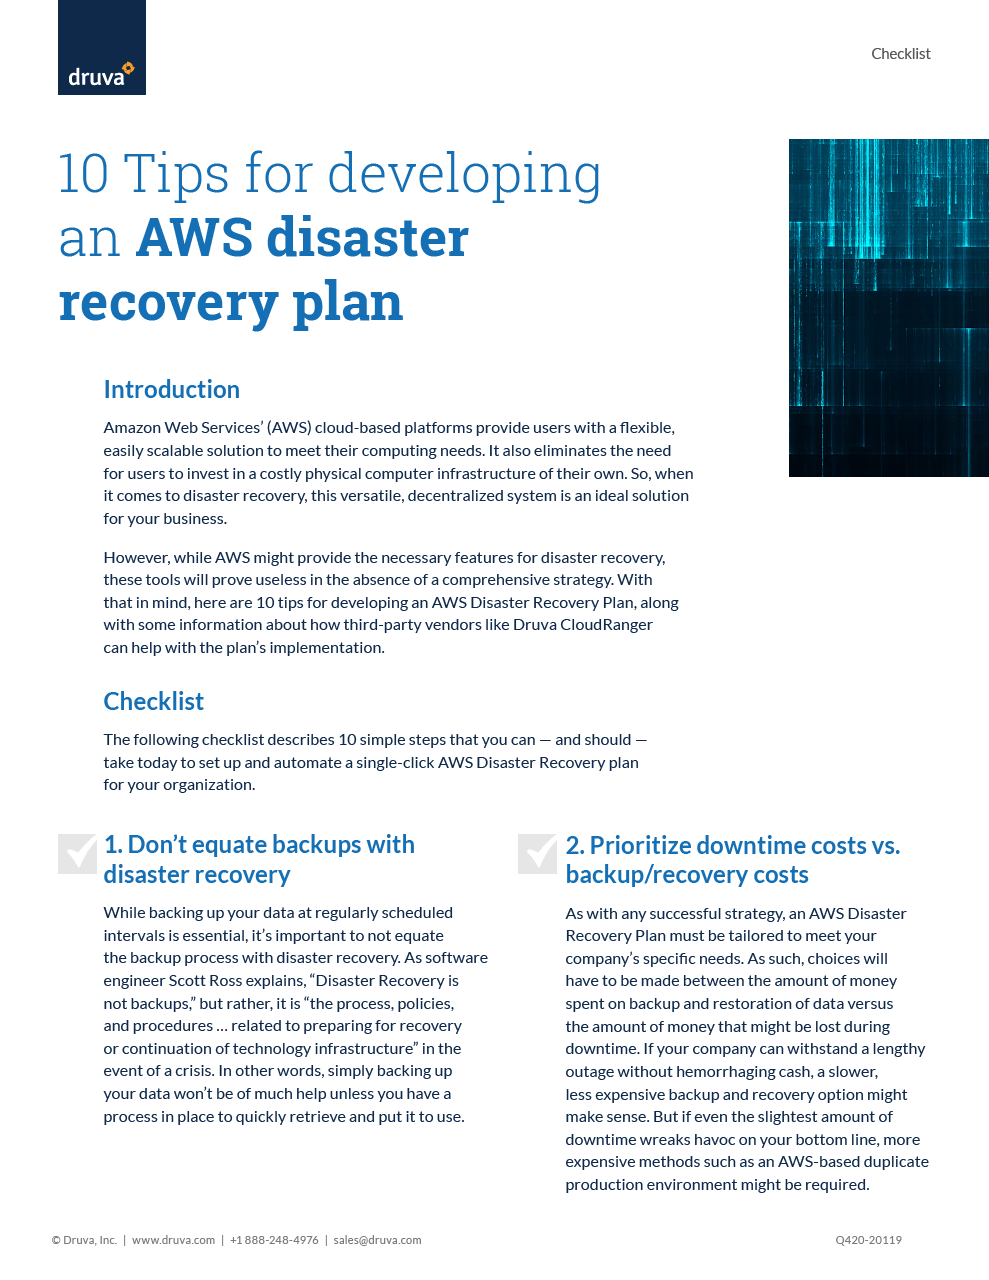 10 Tips For Developing An AWS Disaster Recovery Plan